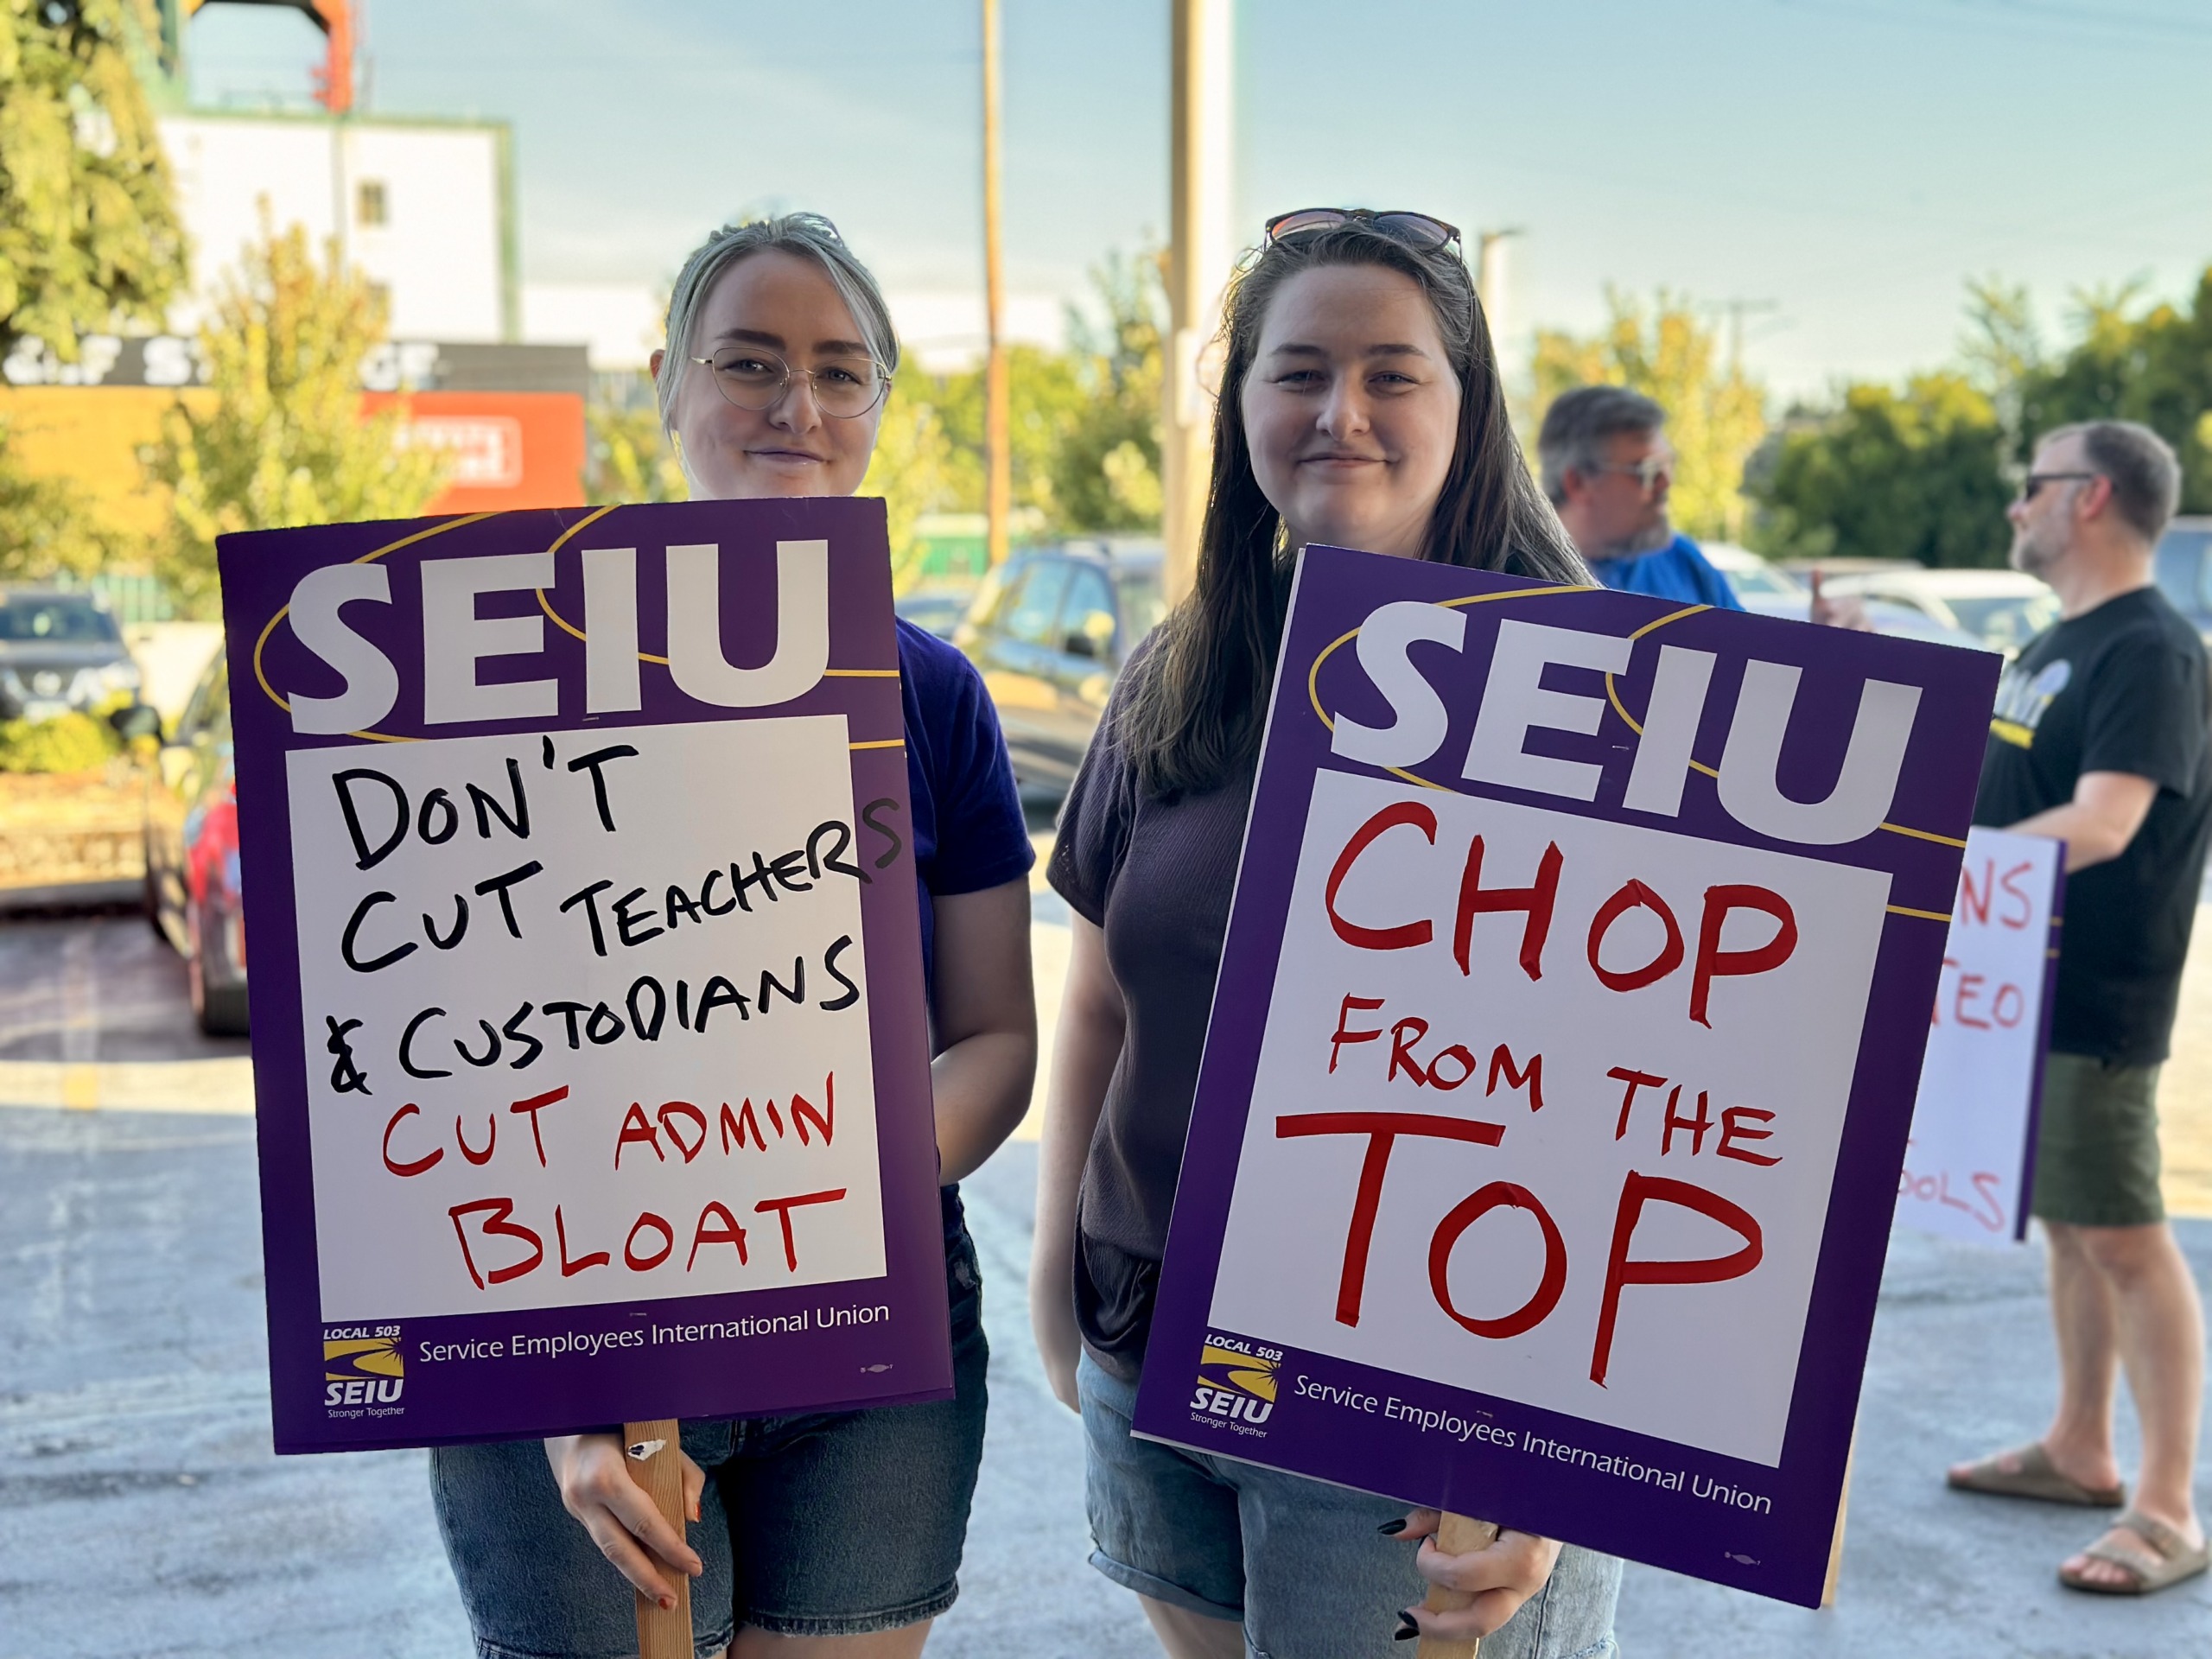 Two PPS custodians holding SEIU signs. One says "Don't cut teachers & custodians, cut admin bloat". The other says "Chop from the top"